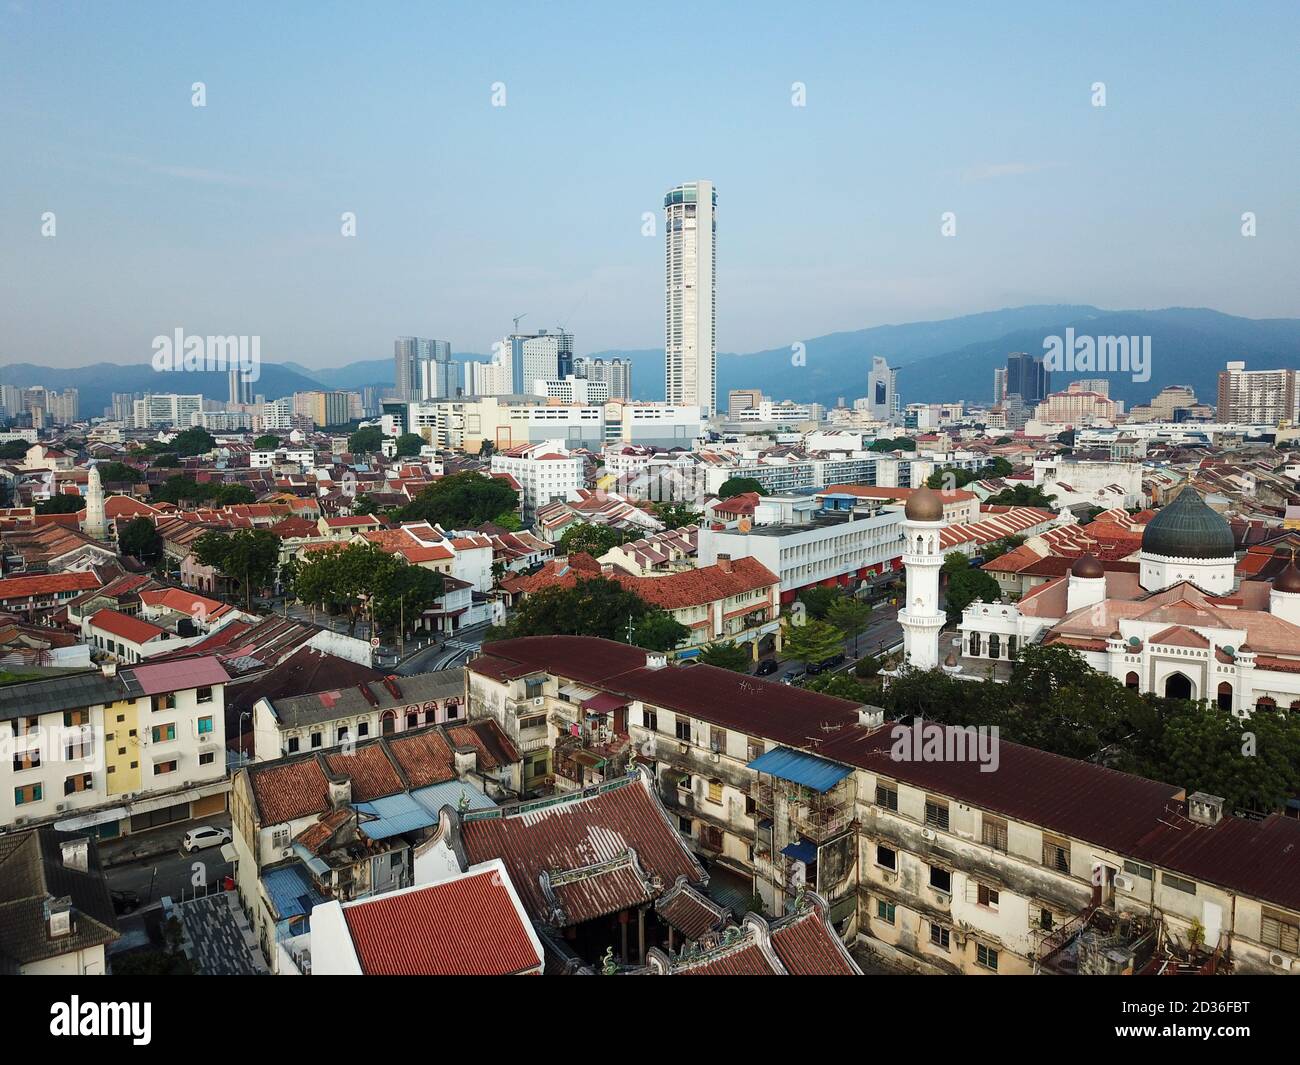 Georgetown, Penang/Malaysia - Mar 21 2020: Aerial view Georgetown KOTMAR building and old house. Stock Photo